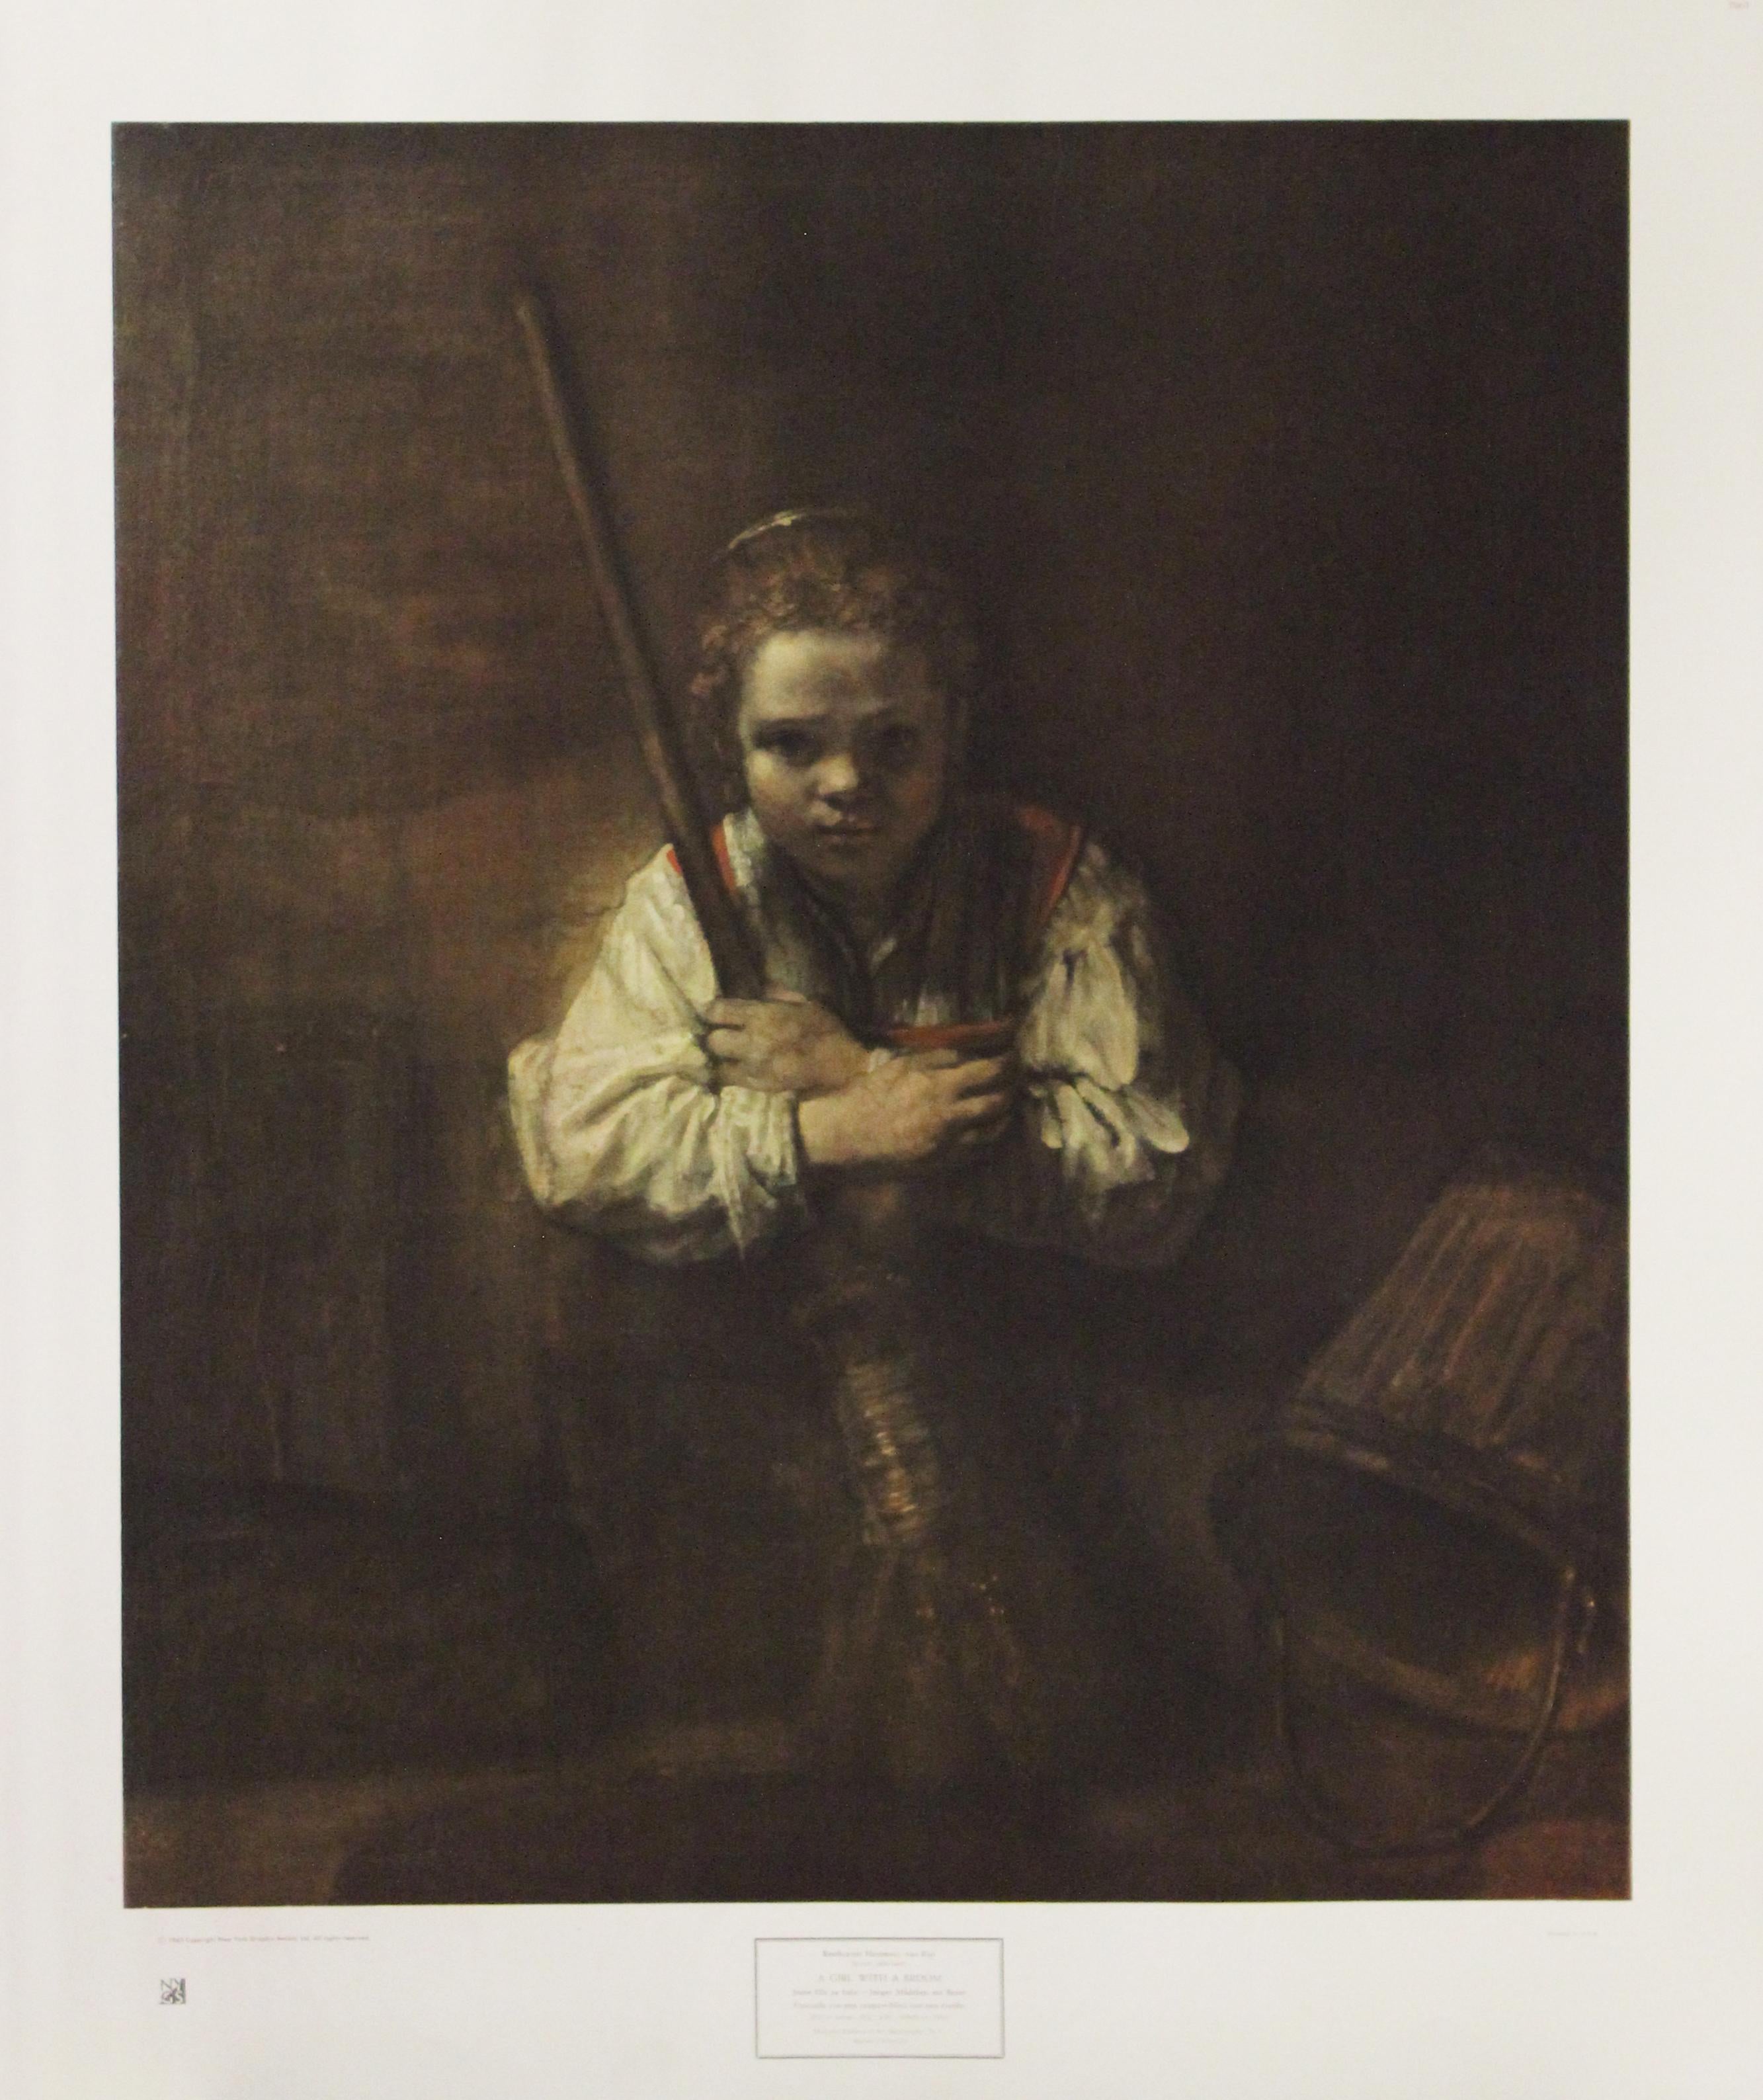 (After) Rembrandt van Rijn  Portrait Print - A Girl With A Broom-Poster. New York Graphic Society Ltd. 